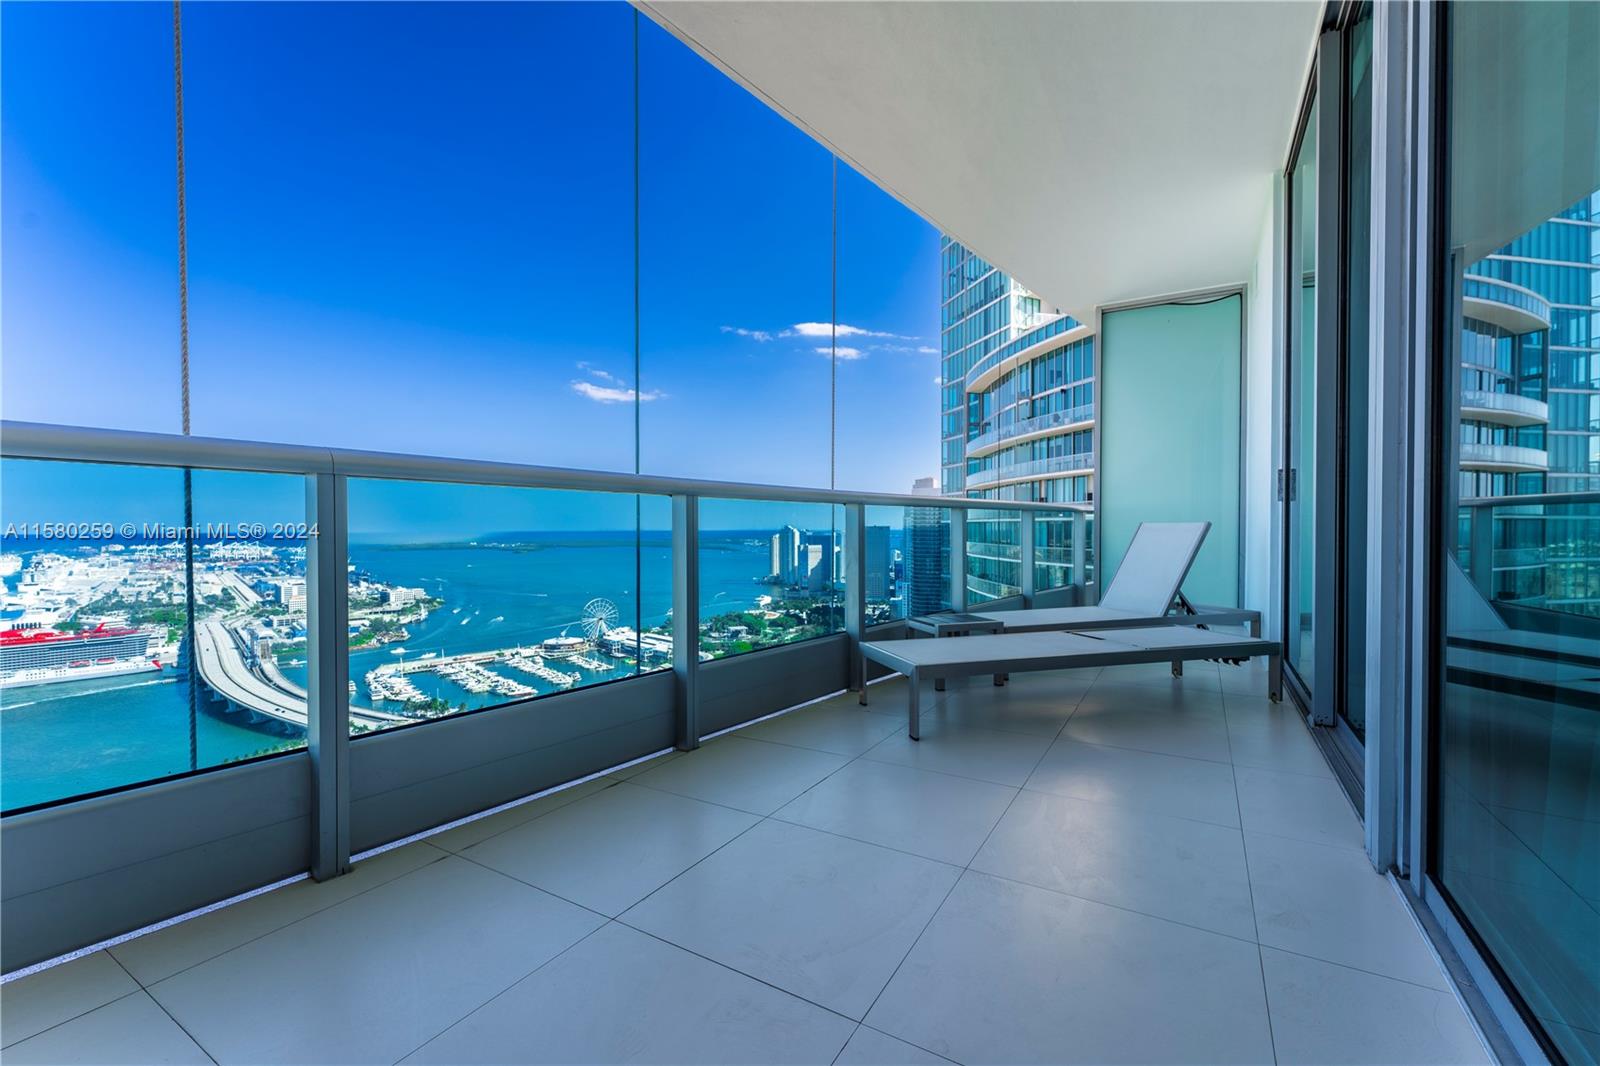 Turn key residence with unobstructed ocean & bay Views in the heart of Miami. Upgrades and Features include guest "murphy" bed, floor to ceiling windows, automatic blinds, high end furniture, SubZero and Miele appliances, small kitchen appliances & utensils. 900 Biscayne offers central location next to Museum Park, Concert arena, Modern Art Museum, Museum of Science, Balet, Opera as well as easy connection to Brickell, Miami Beach & the airport. Amenities include 24/7 front desk attendant, security, valet, top of the line Gym, Social rooms, Theatre, resort style Spa, Swimming pools and more.